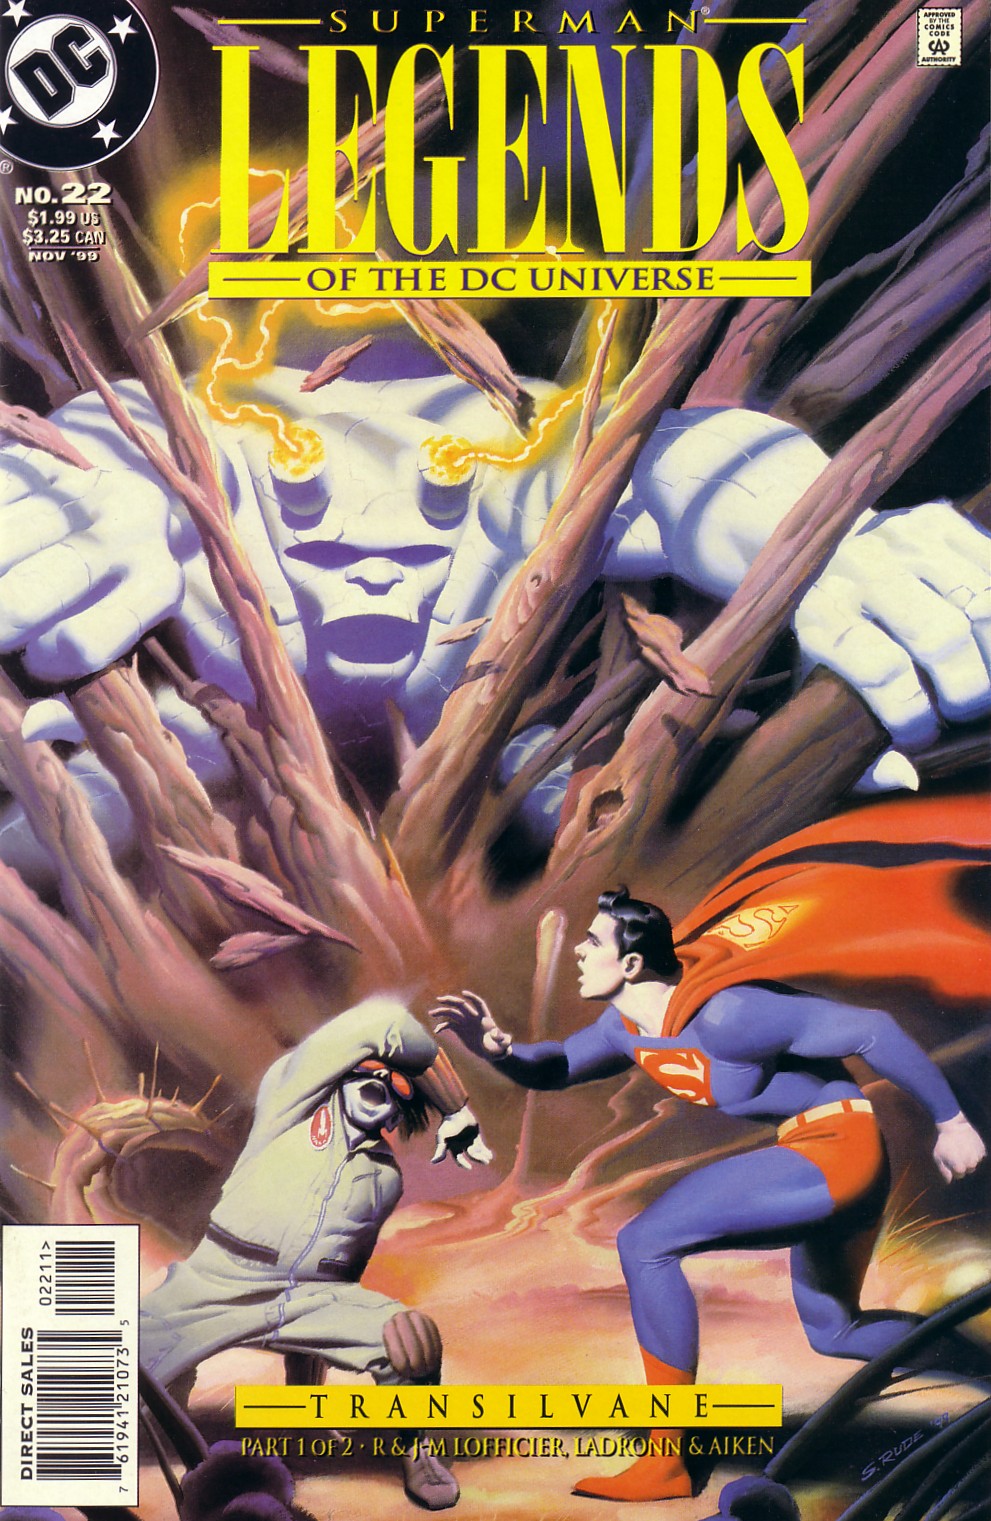 Read online Legends of the DC Universe comic -  Issue #22 - 1